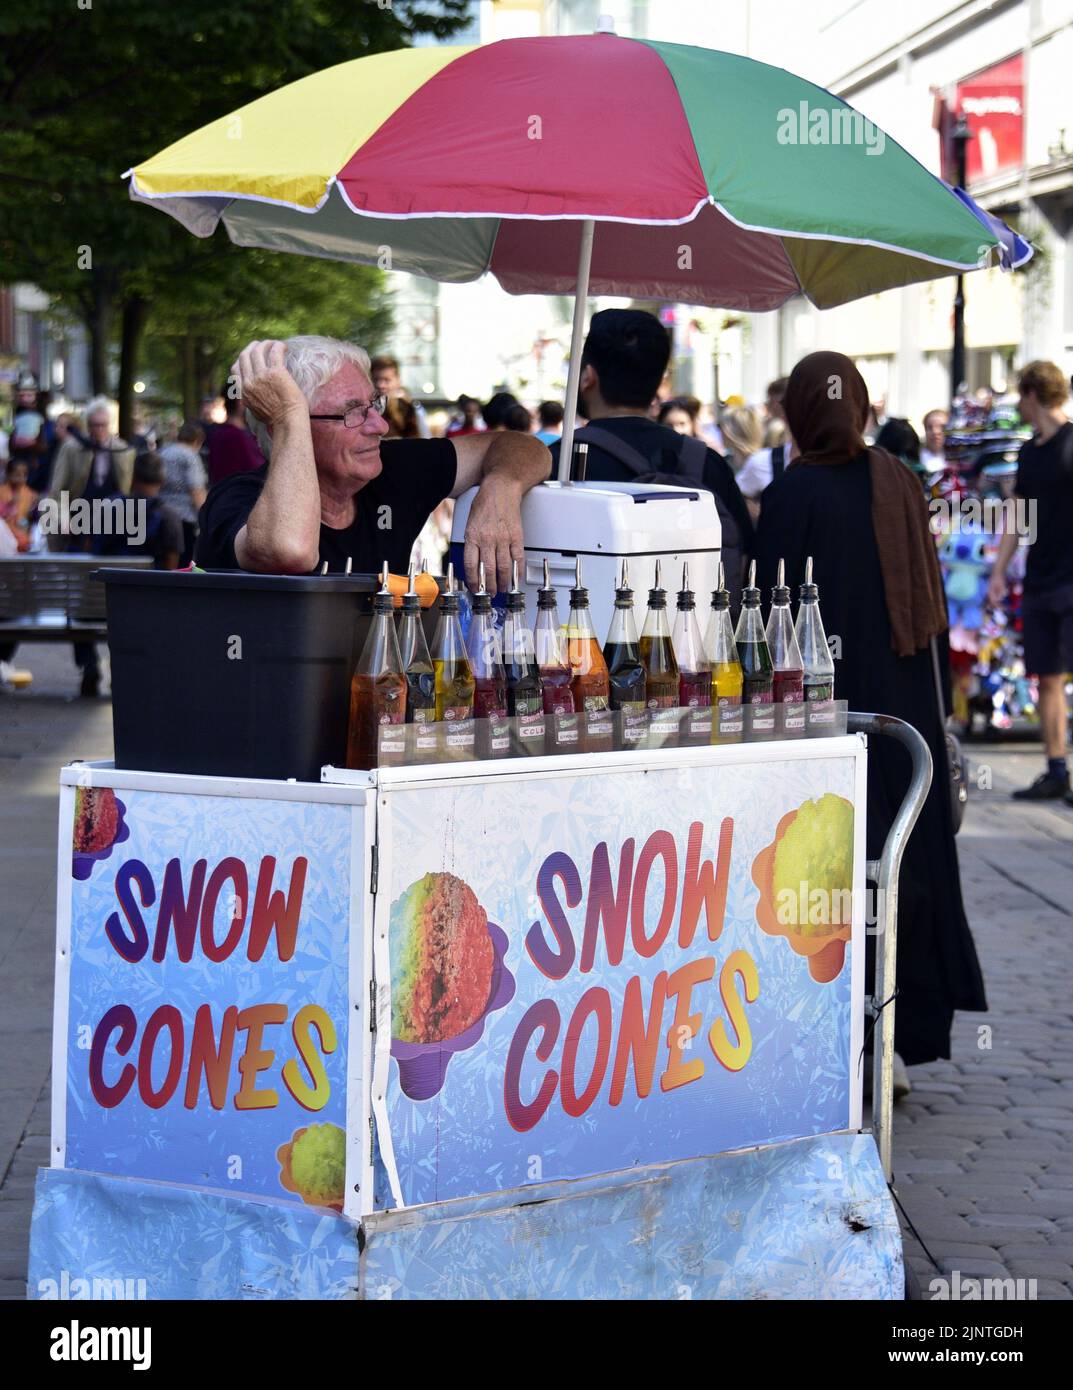 A man selling snow cones at a stall on a hot day on Market Street, central Manchester, United Kingdom, British Isles. Stock Photo